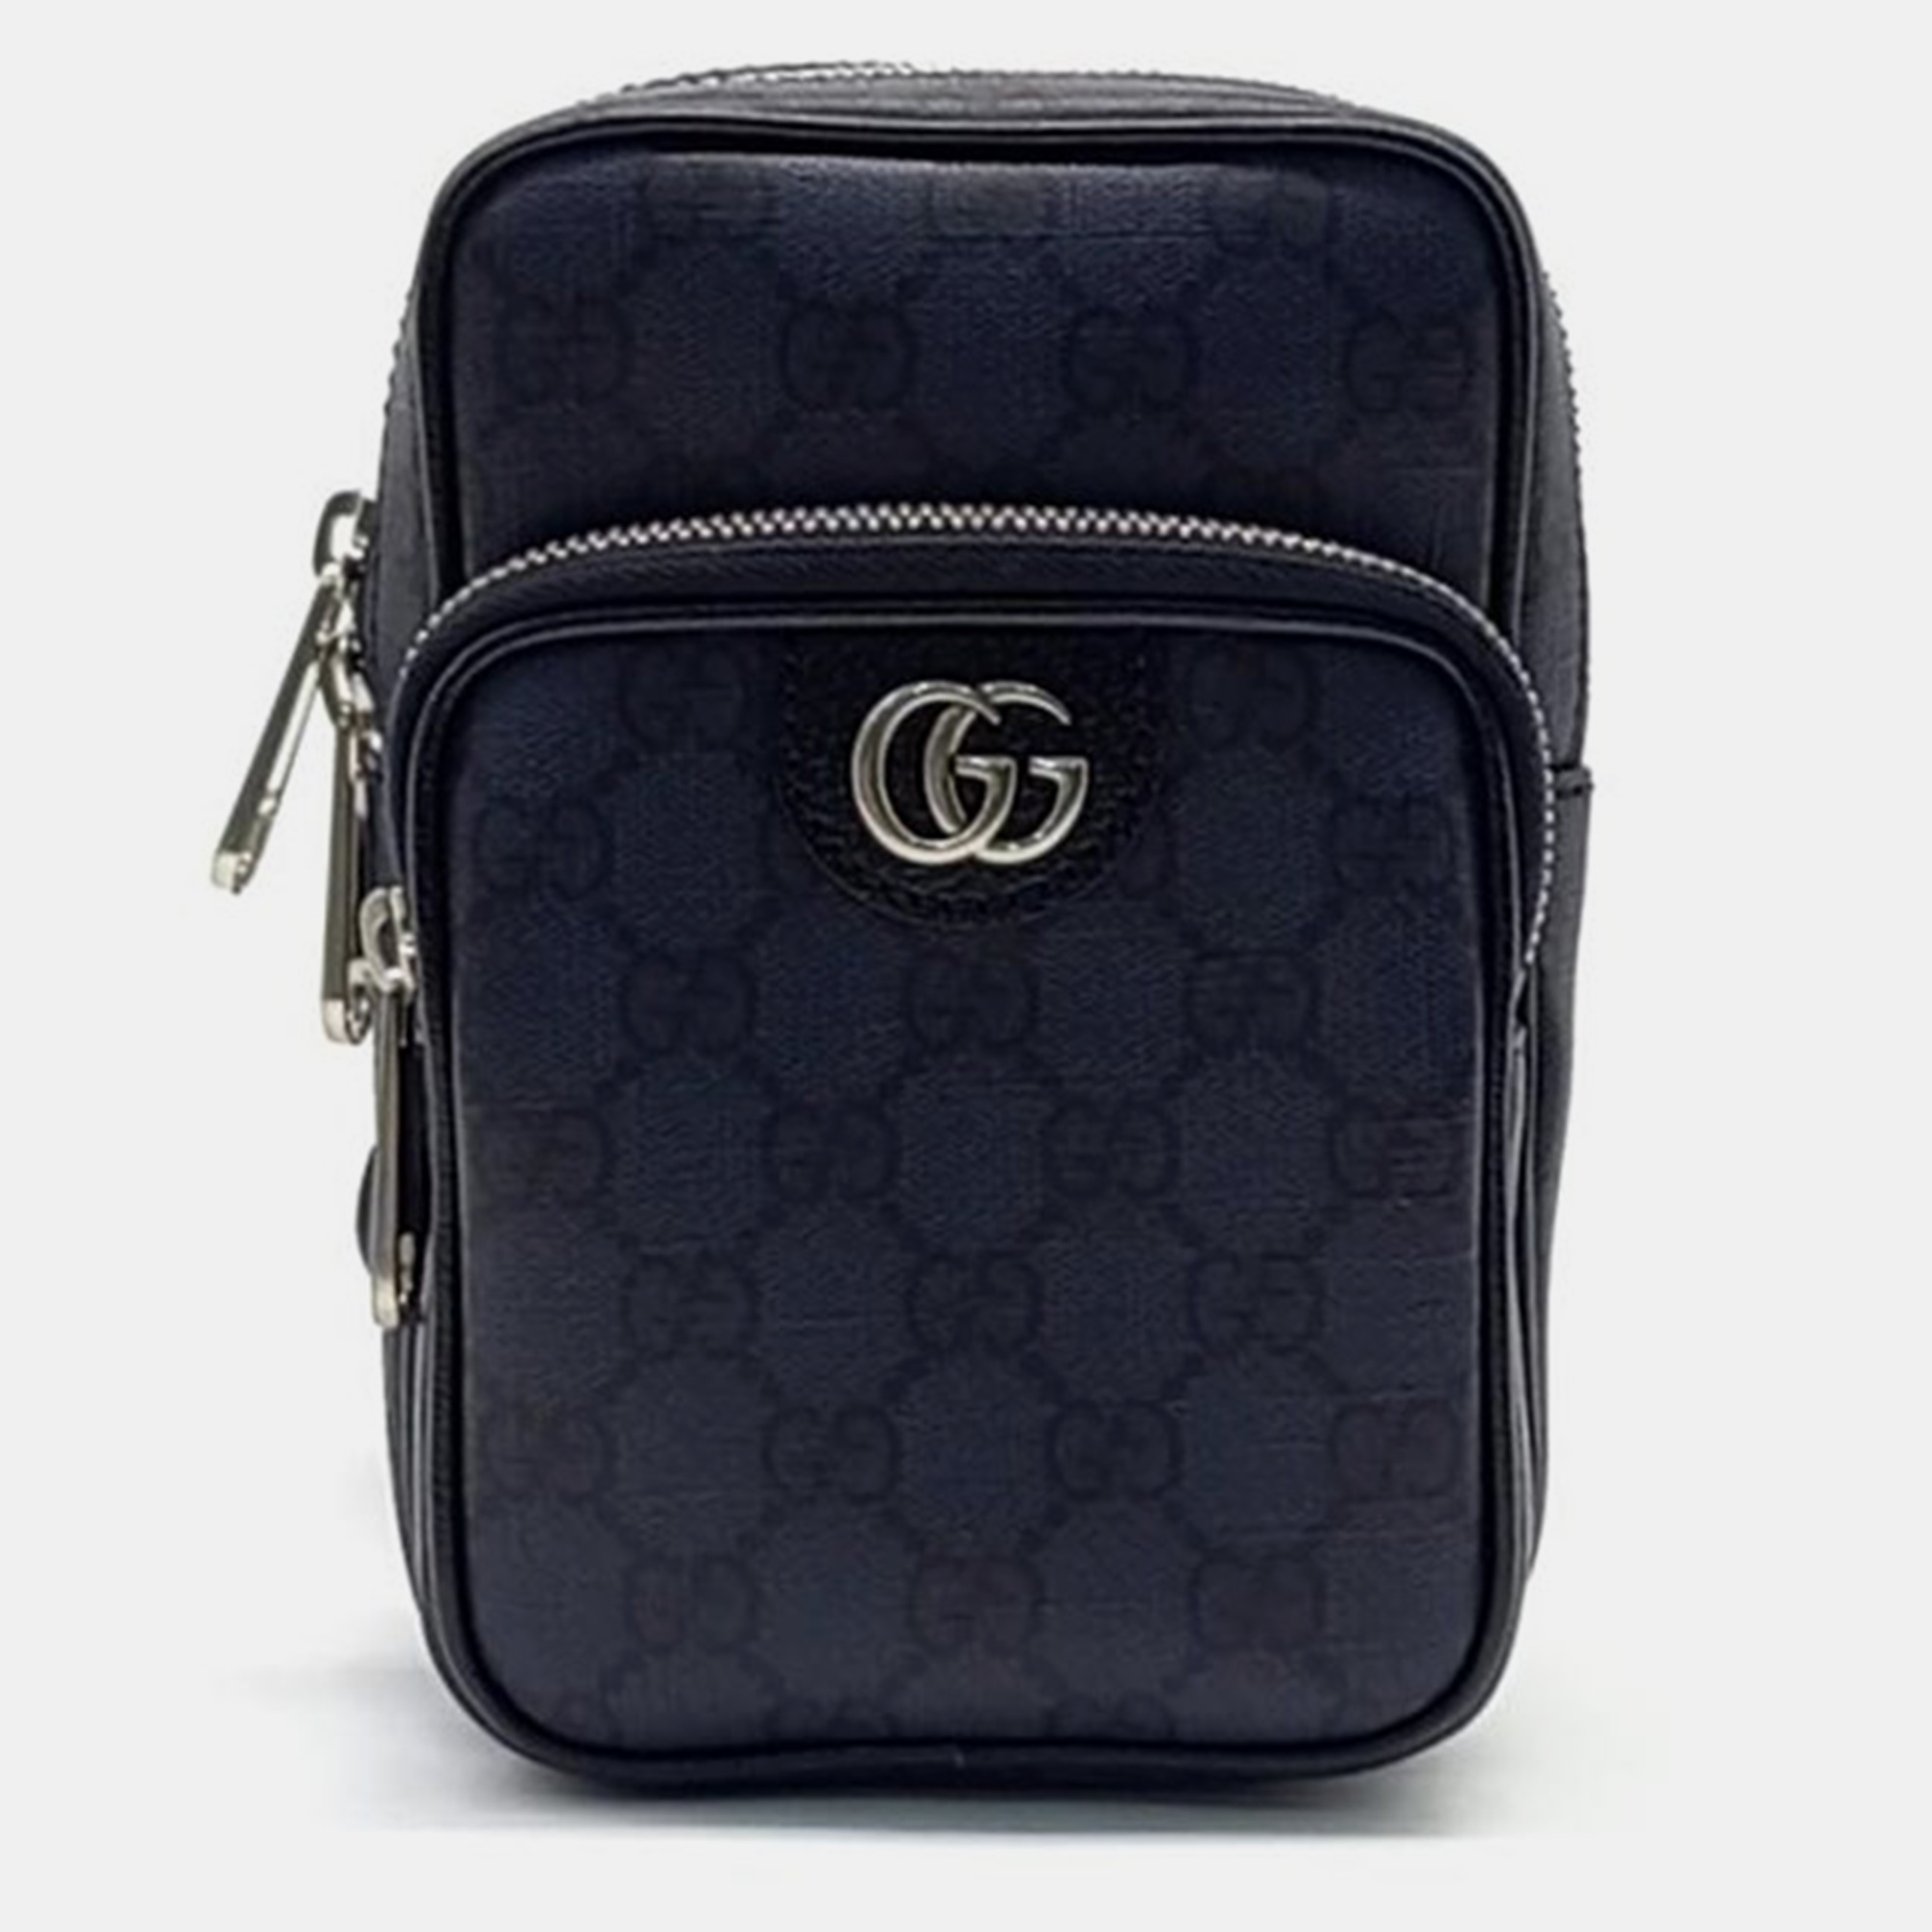 Elevate your accessory game with this Gucci belt bag a fusion of fashion and functionality. Crafted from luxurious materials it offers hands free elegance and effortless style for todays on the go trendsetter.